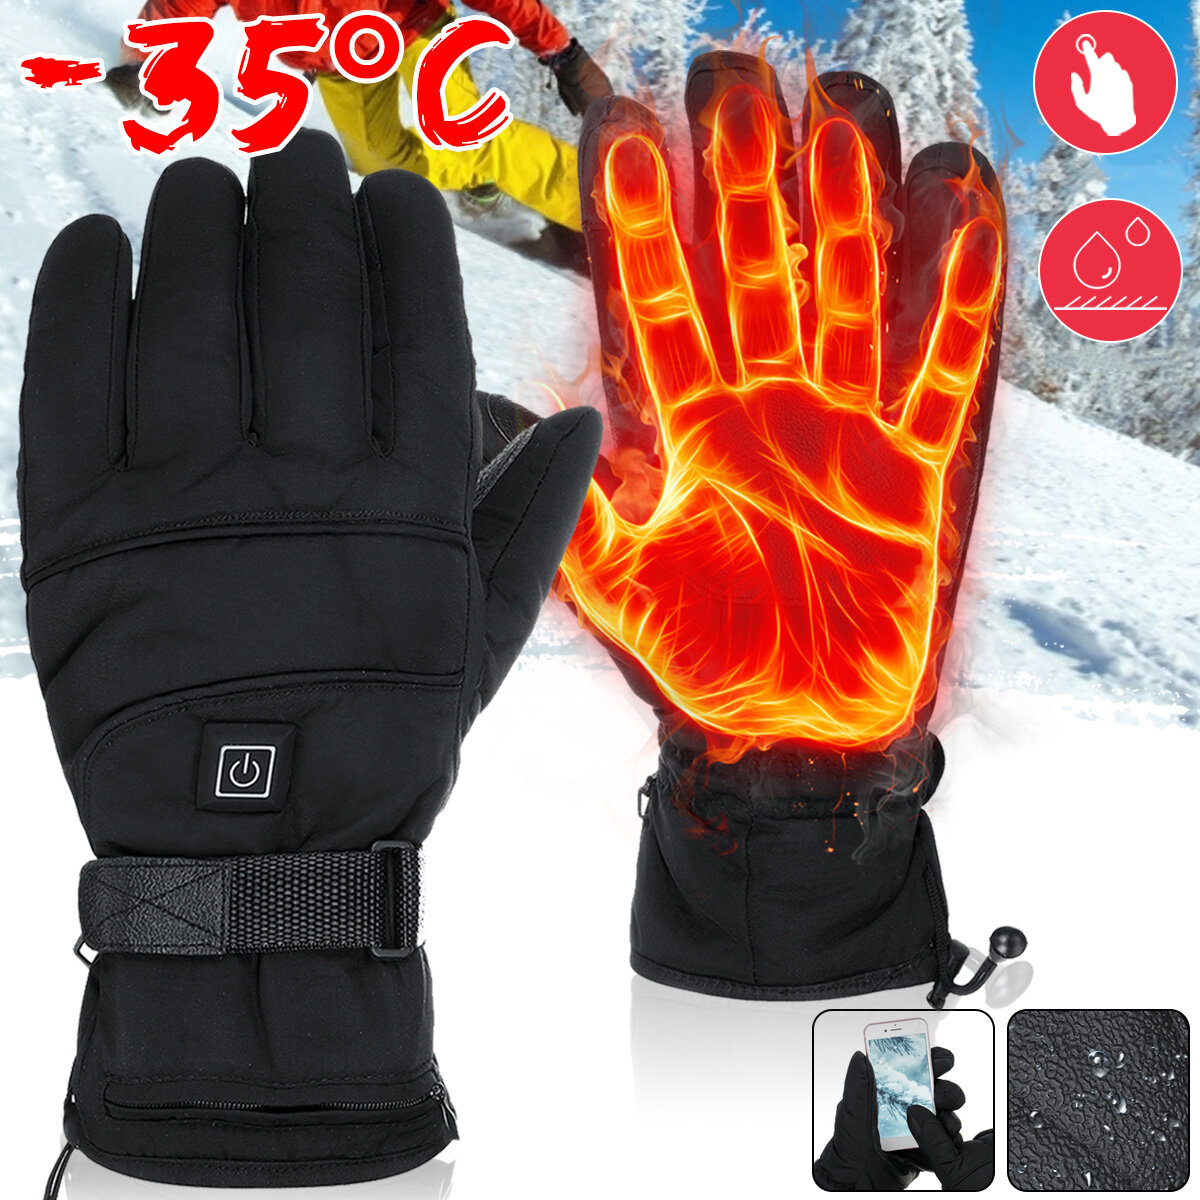 

USB Powered 3-Gear Temperature Control Winter Warm Waterproof Windproof Outdoors Motorcycle Riding Heated Gloves